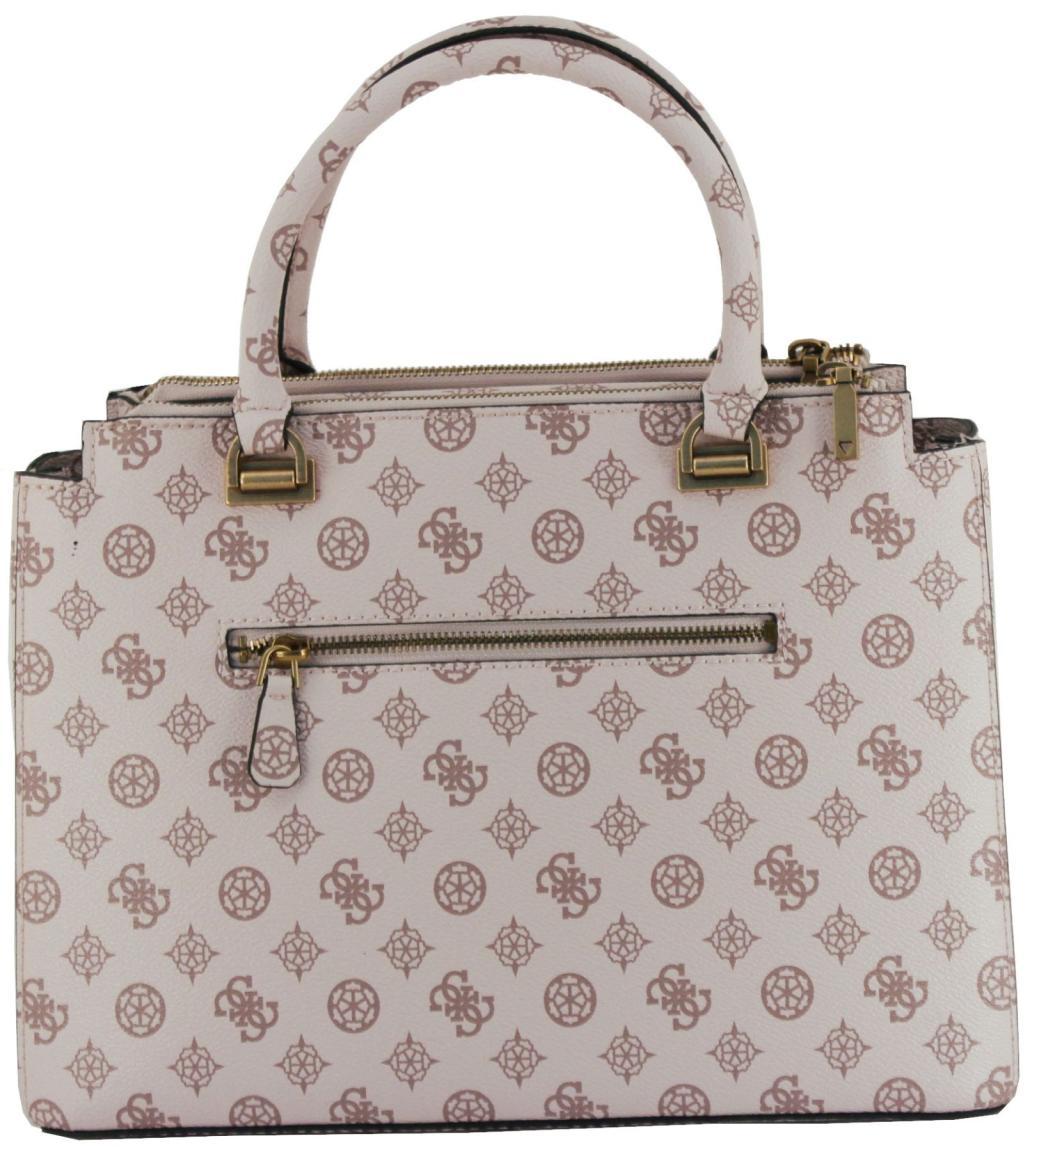 Kurzgrifftasche Guess Centre Stage Shell Logo Beige Rosa Messing